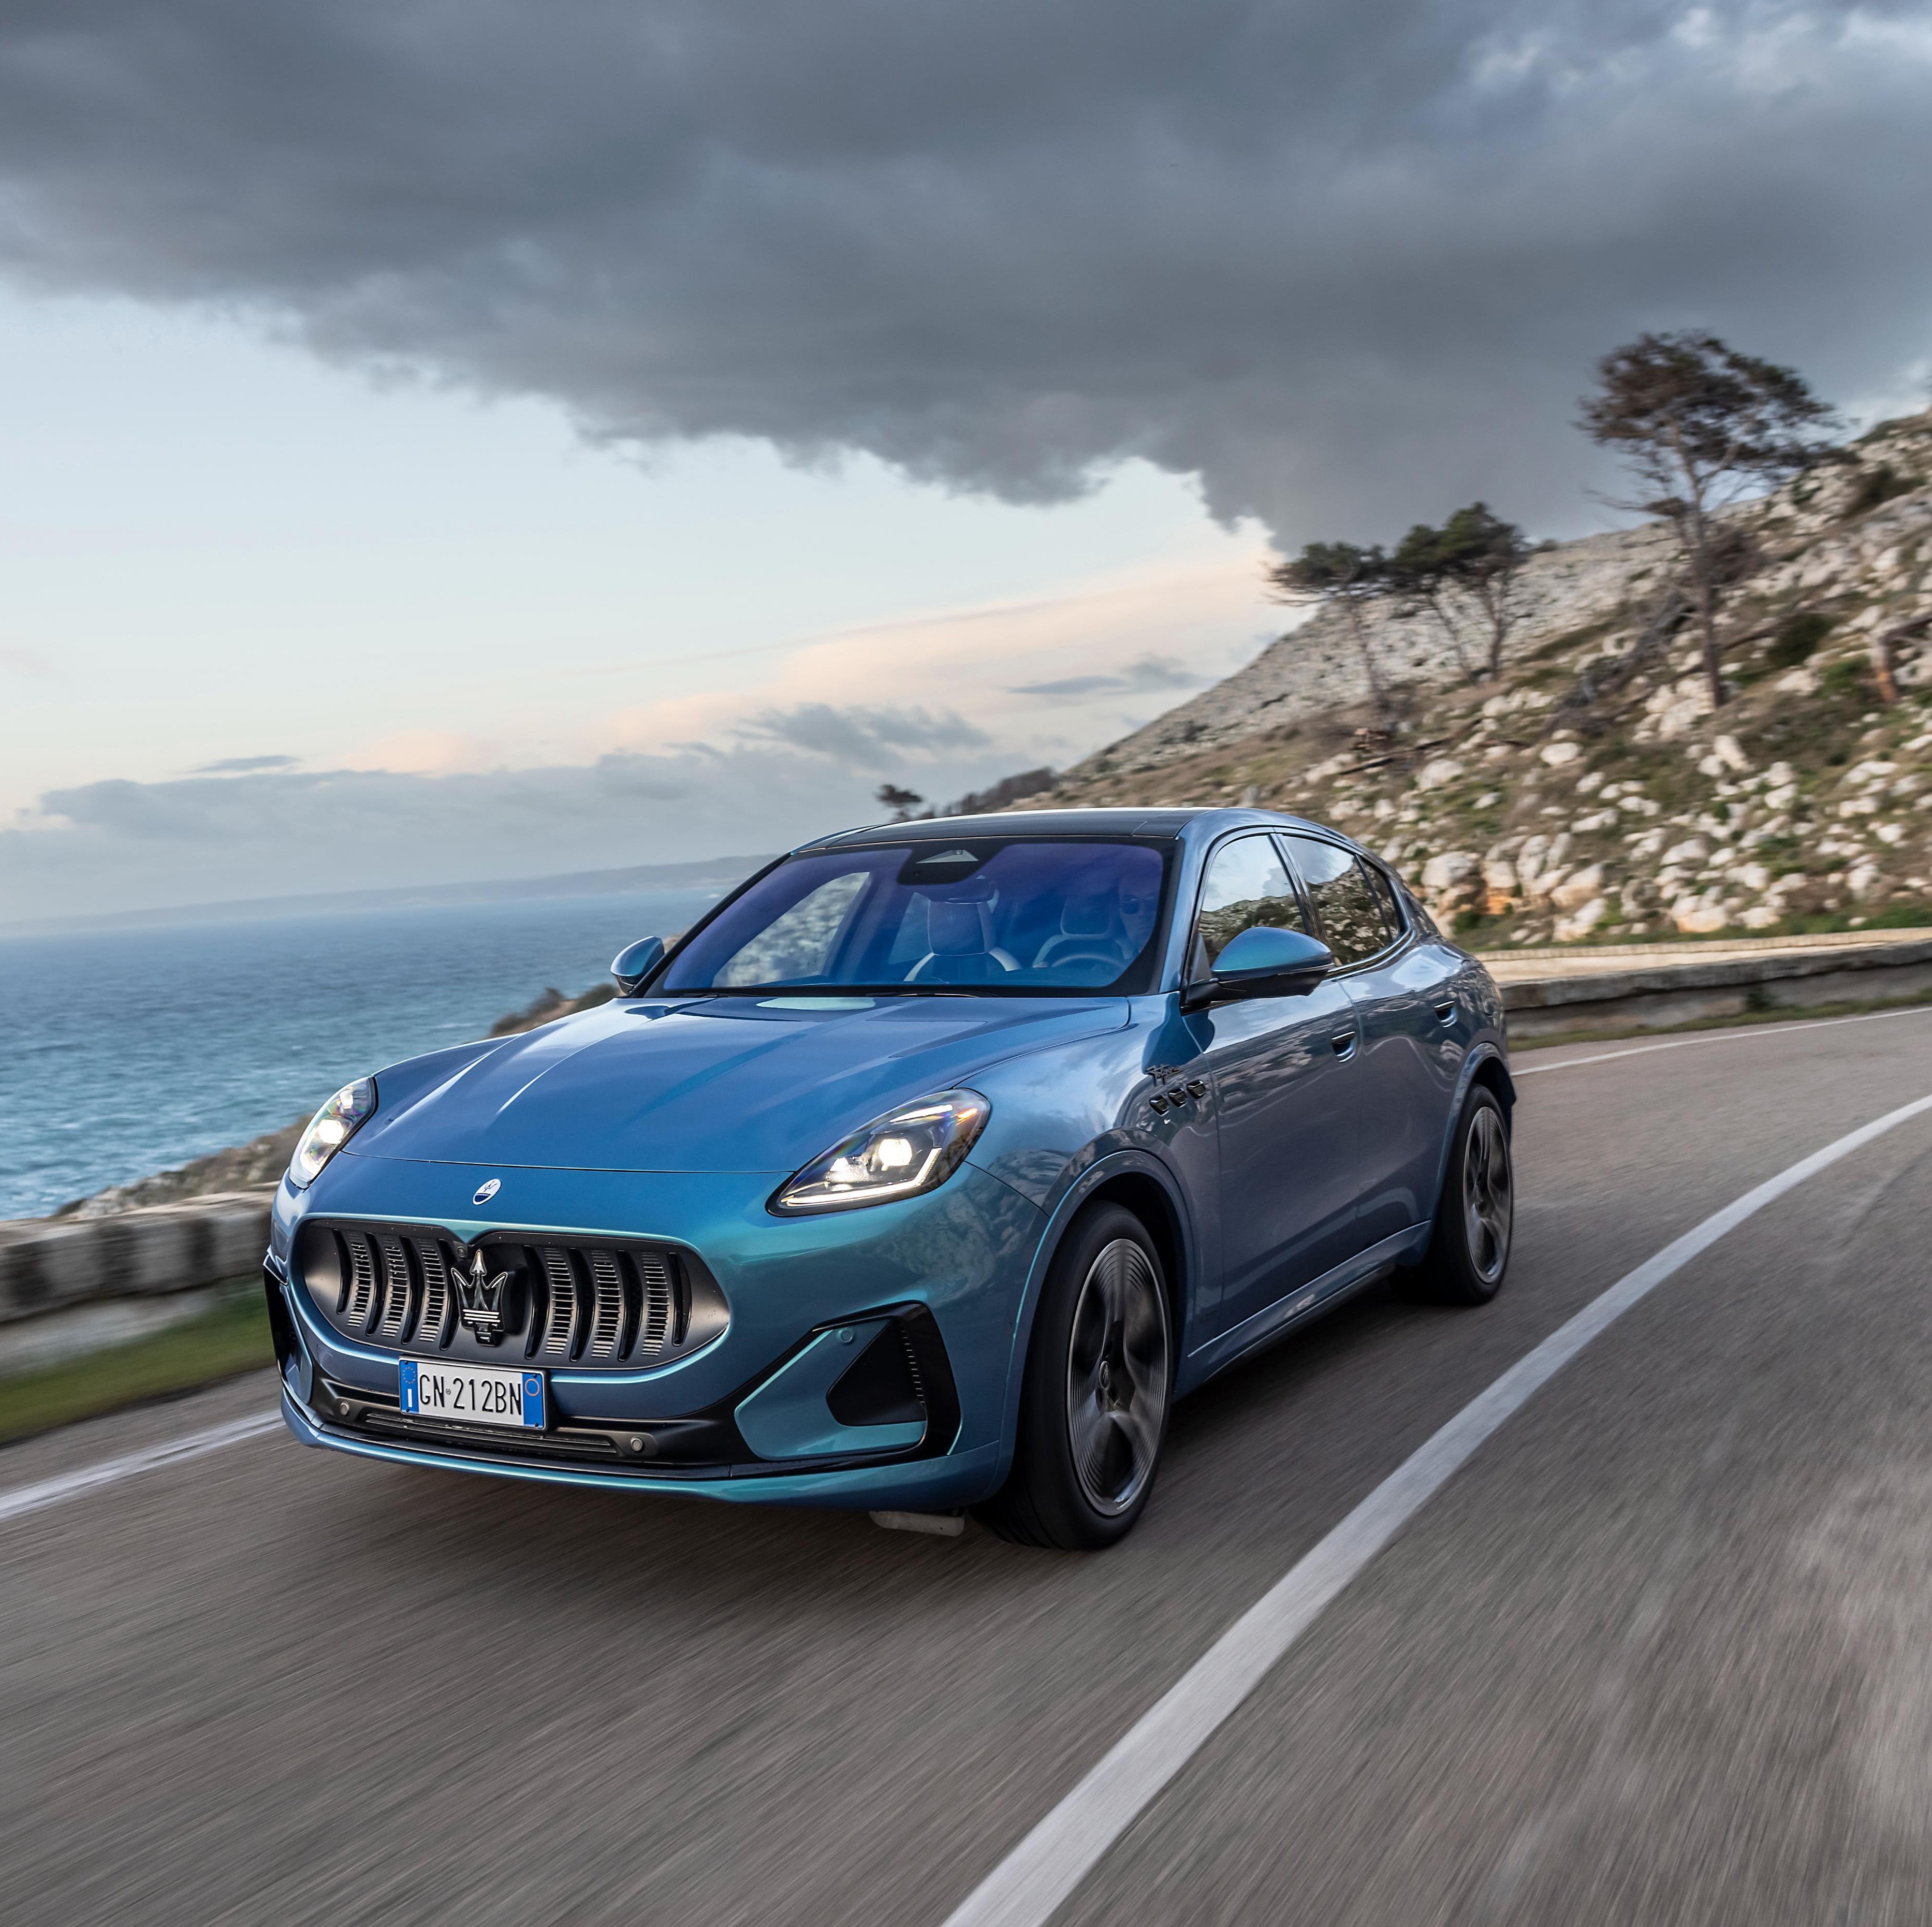 Maserati Grecale Folgore Is All-Electric Luxury Performance in an SUV Body